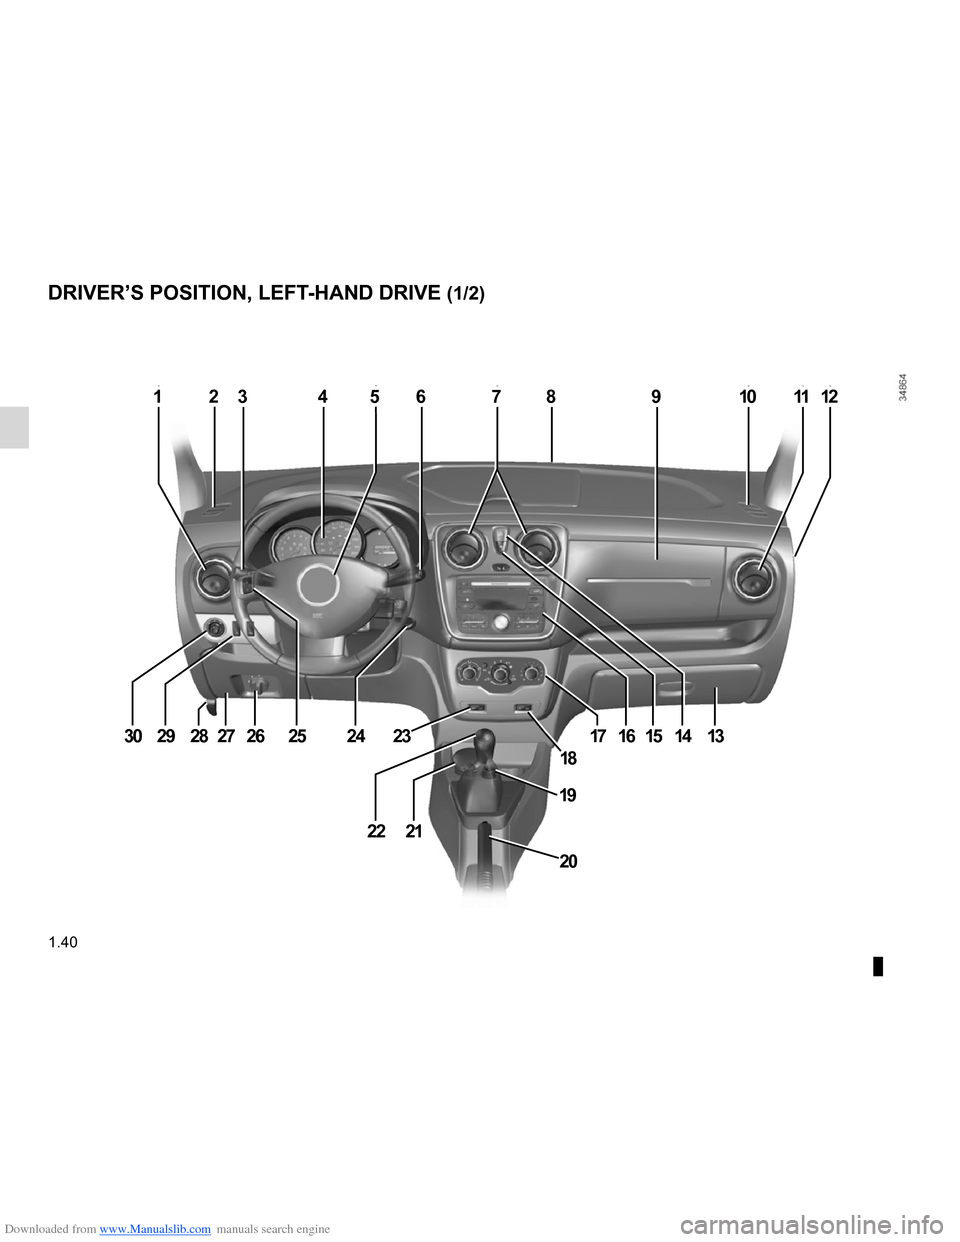 DACIA LODGY 2012 1.G Service Manual Downloaded from www.Manualslib.com manuals search engine controls ................................................. (up to the end of the DU)
driver’s position  .................................... 